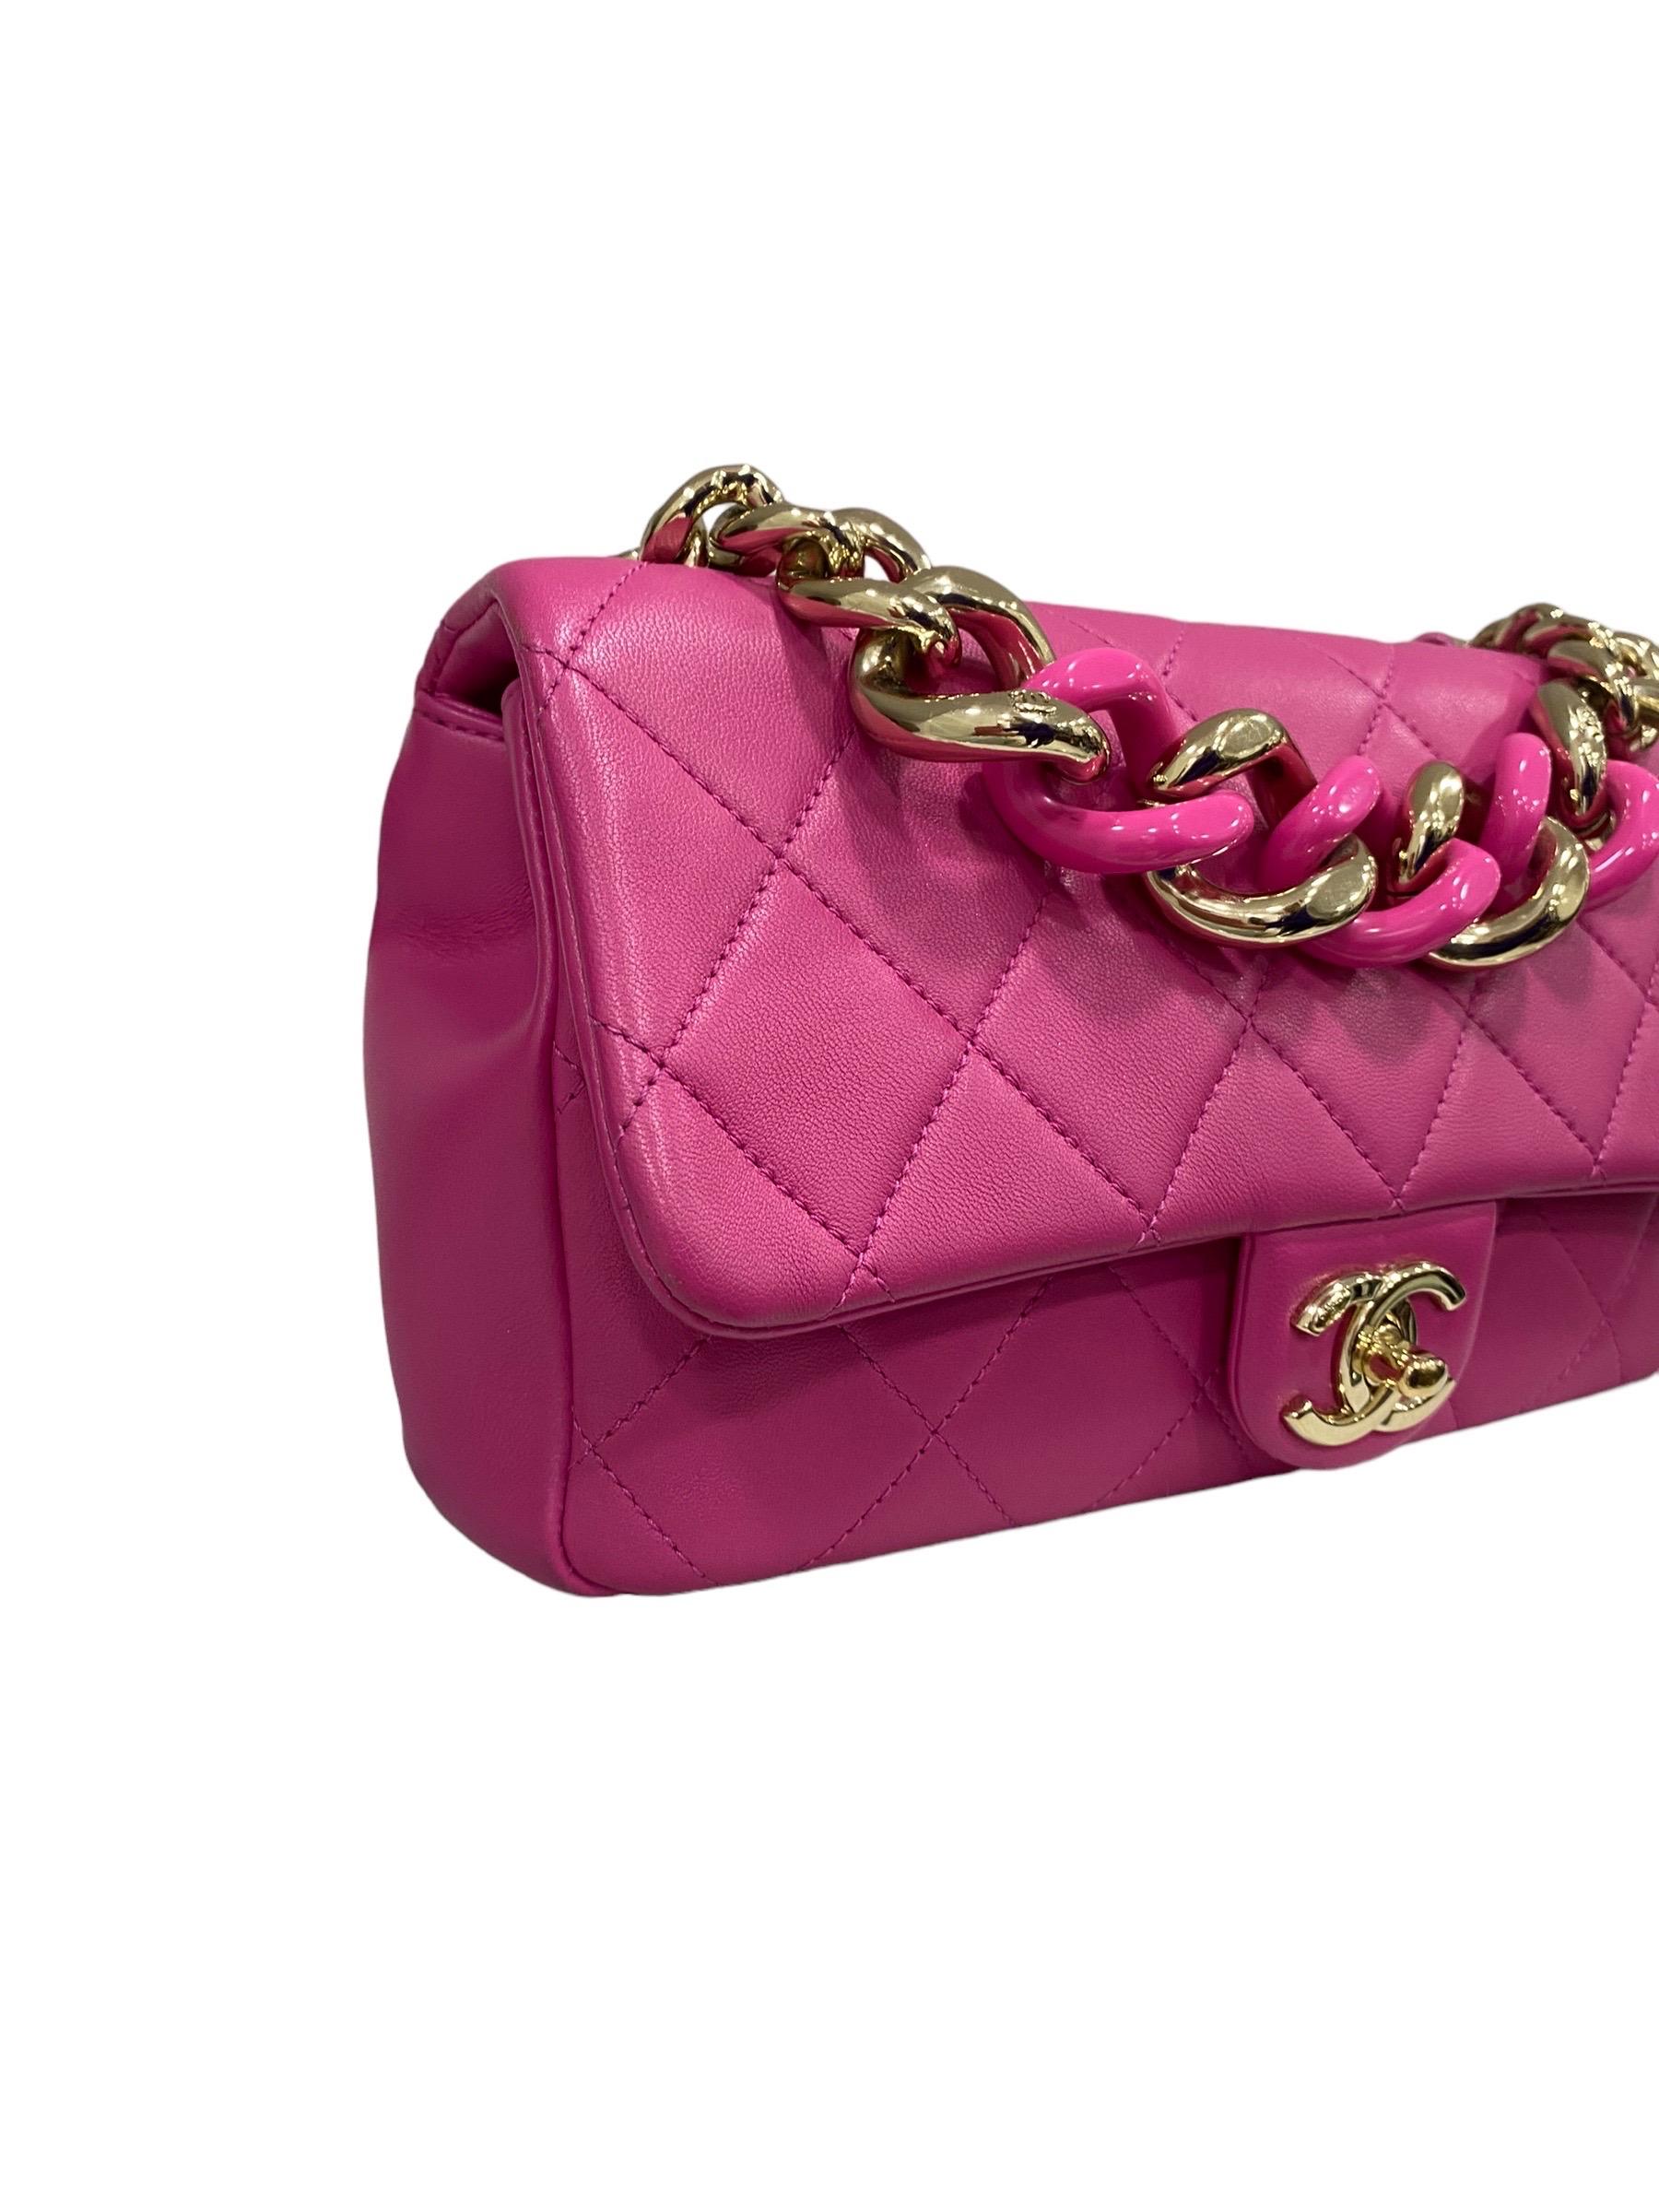 Chanel signed bag, line 19, made in pink smooth leather with golden hardware. The bag is equipped with a flap with interlocking CC logo closure, internally lined in gray fabric, quite roomy. Equipped with a central handle in chain and a shoulder